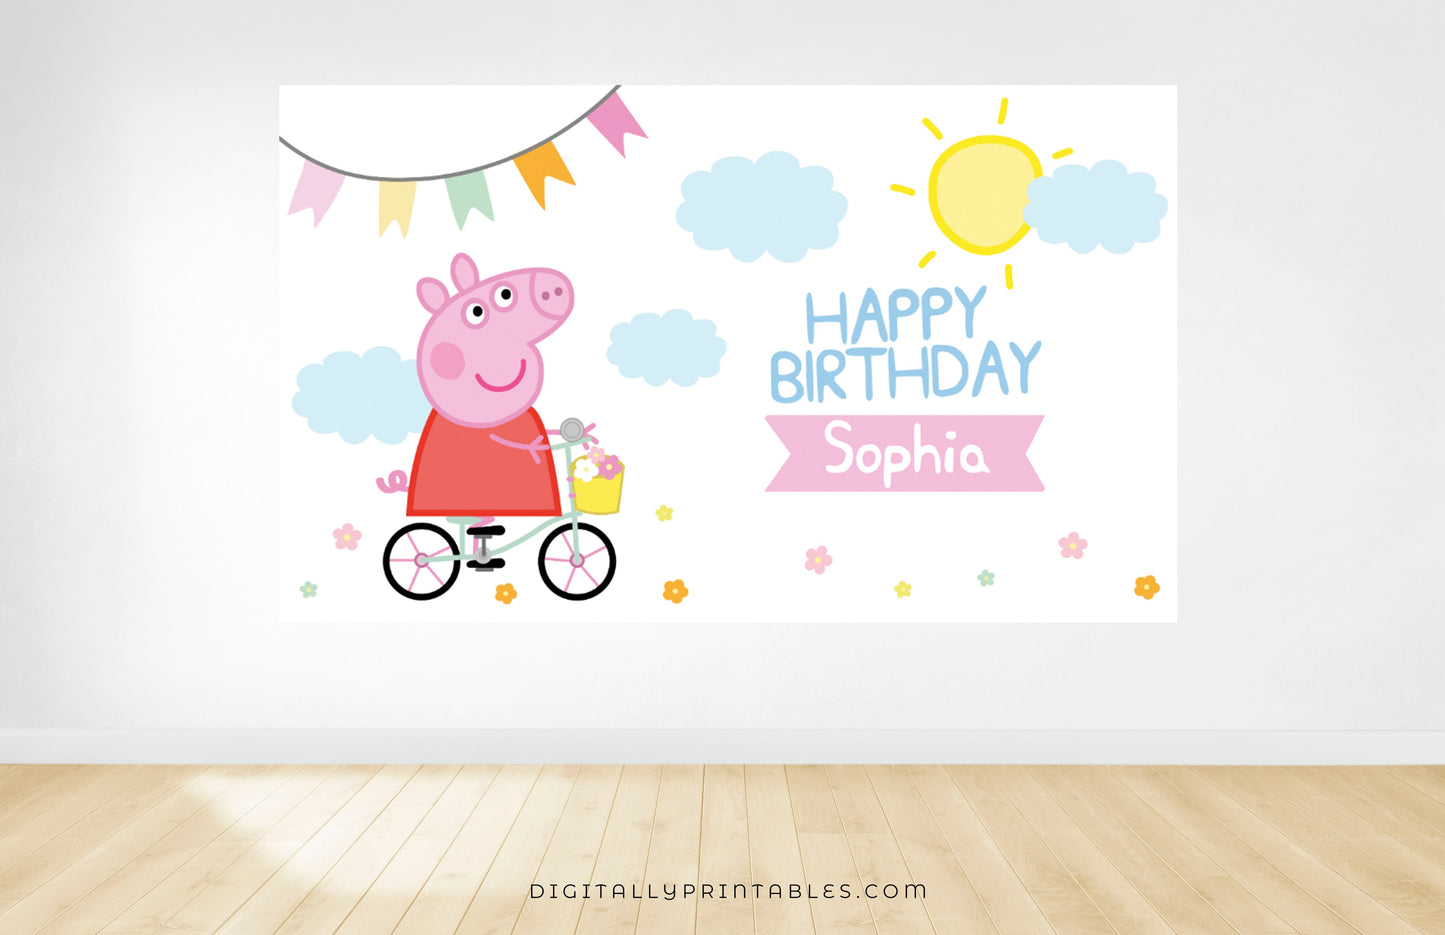 Peppa Pig on the Bicycle ★ Instant Download | Editable Text - Digitally Printables